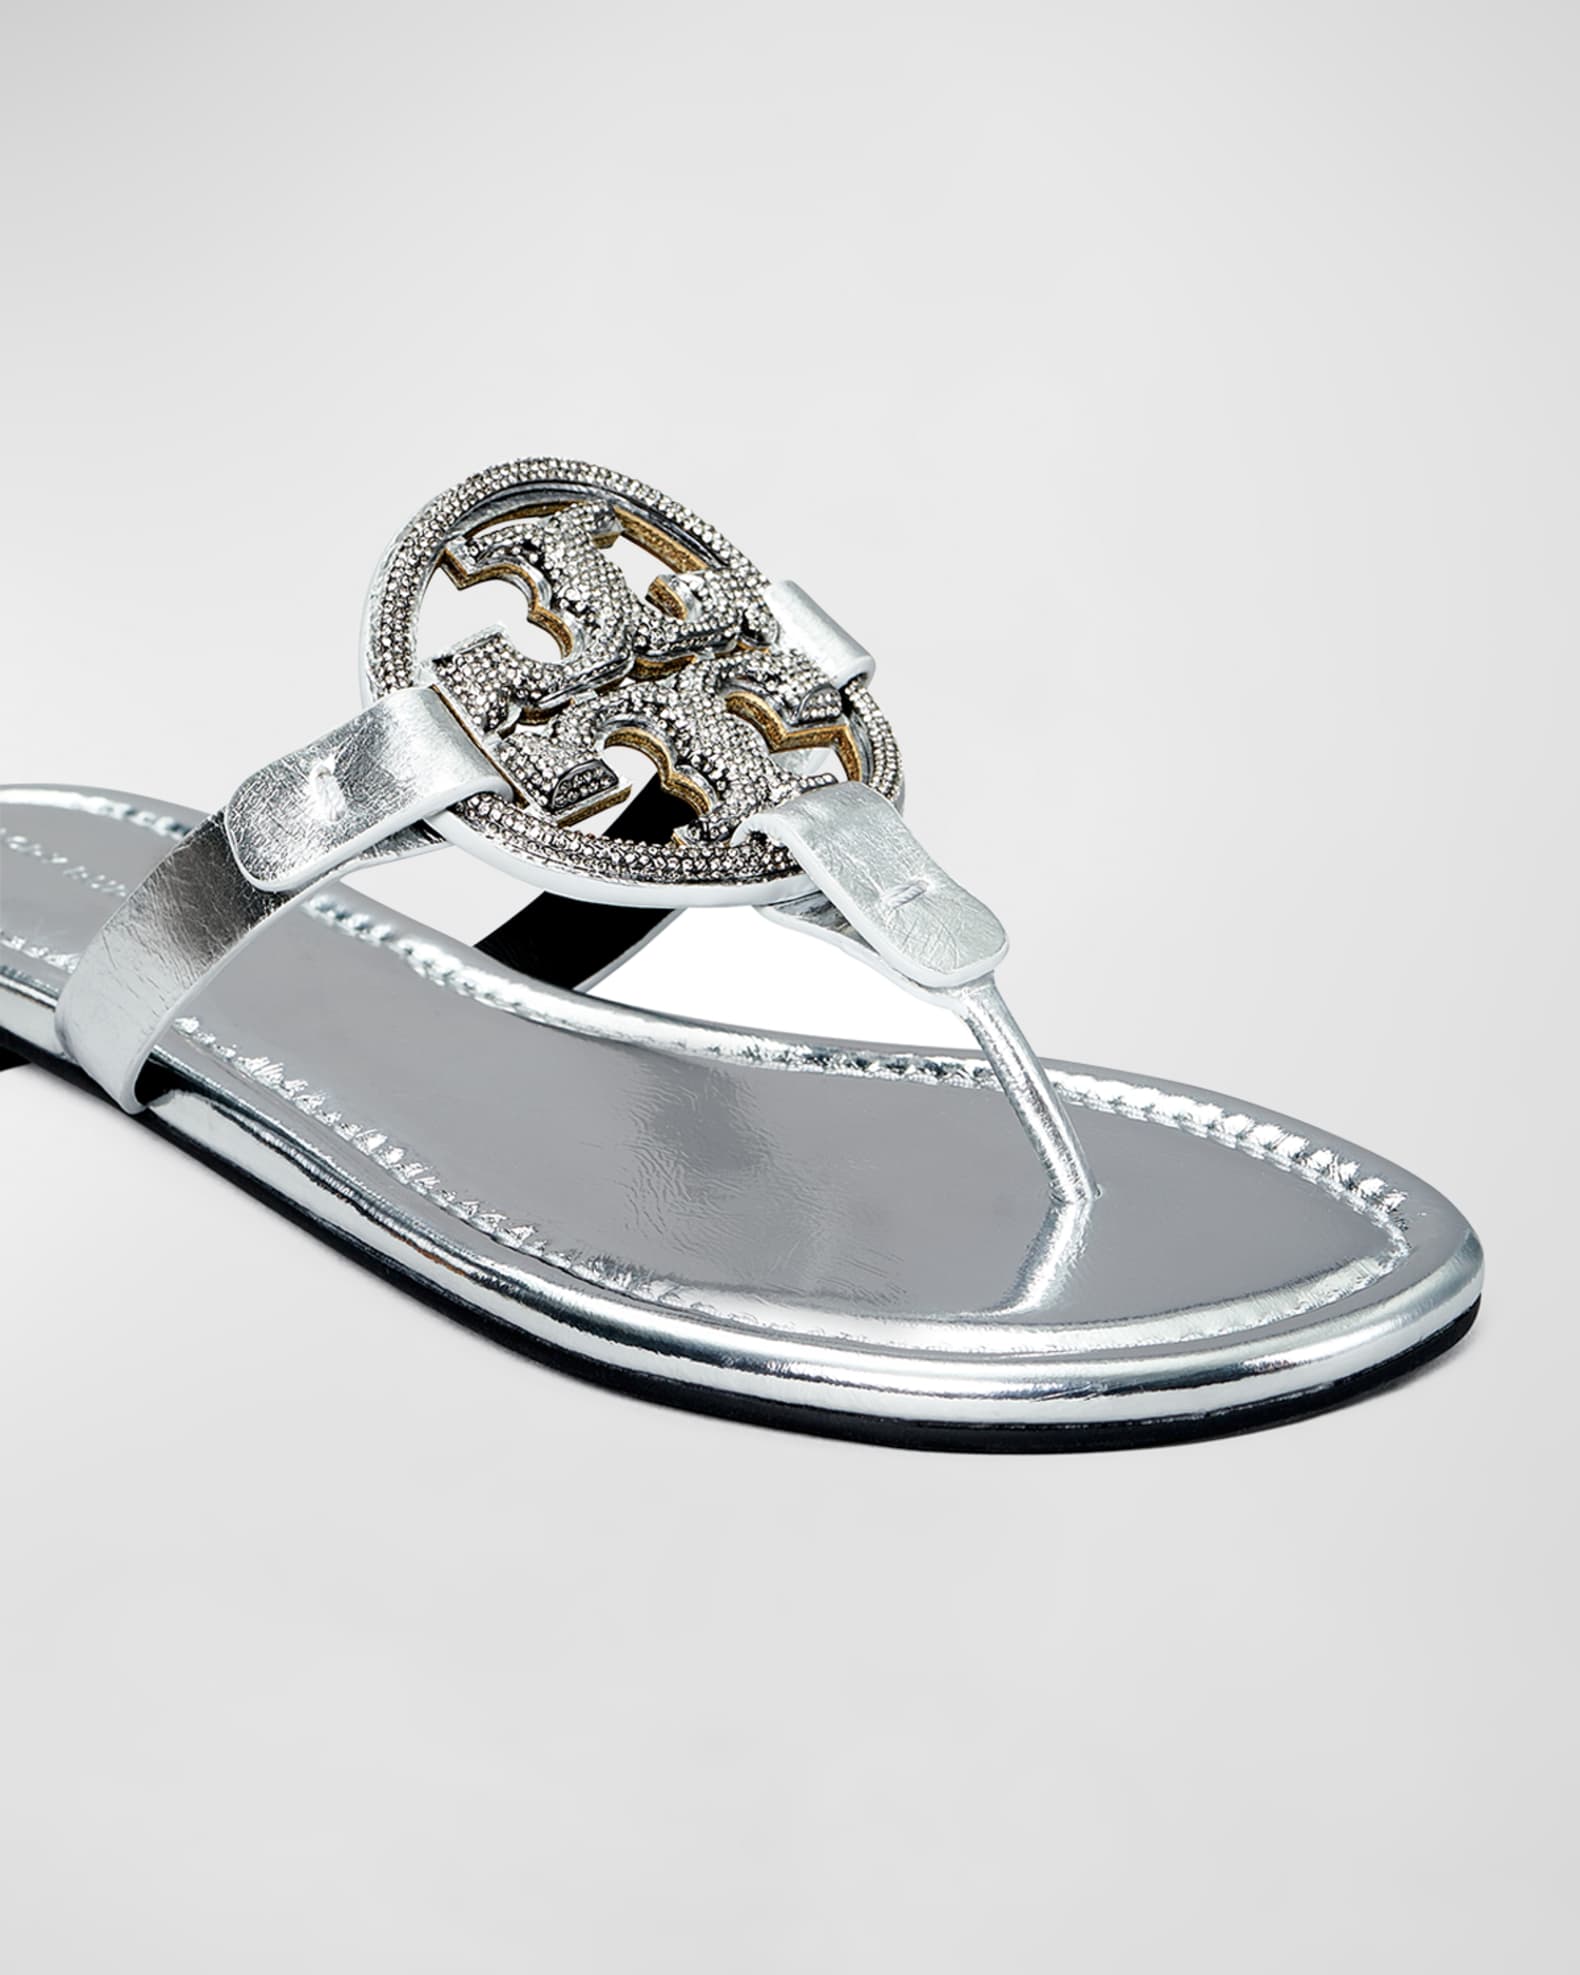 Tory Burch Miller Pave Medallion Thong Sandals | Neiman Marcus